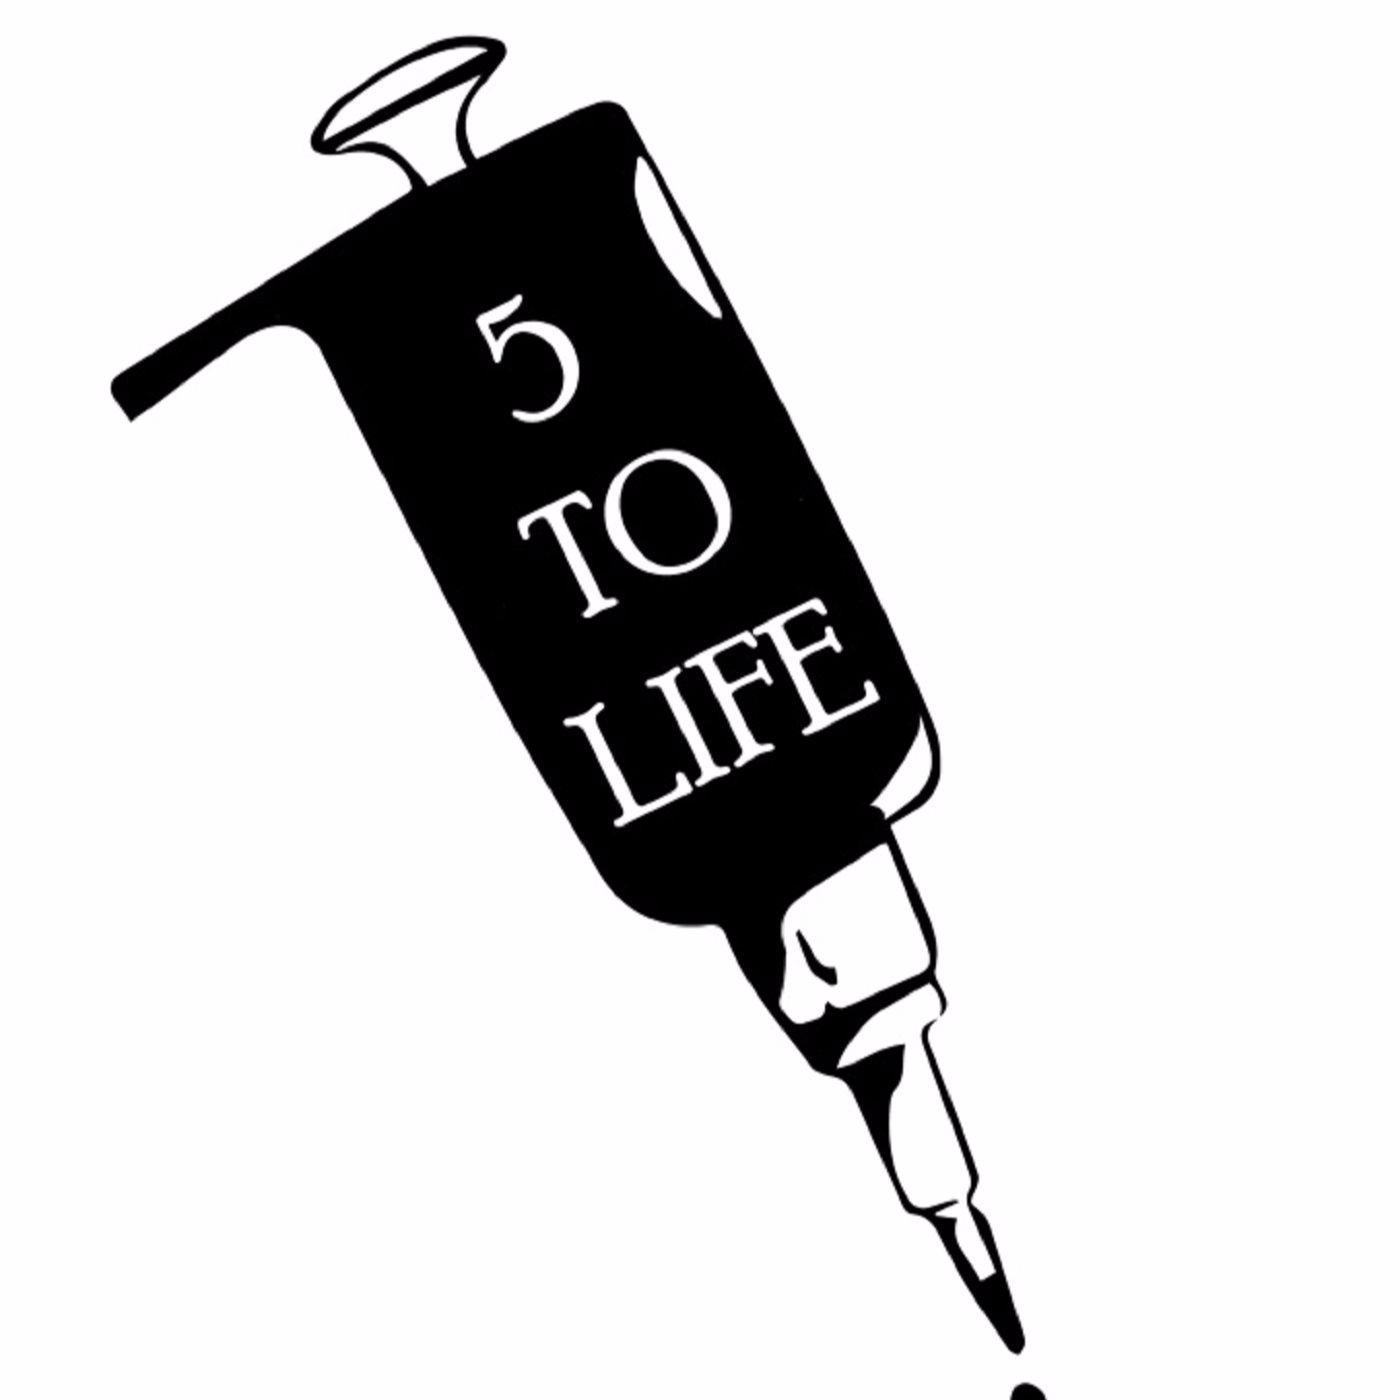 5 to Life: A PhD and Beyond